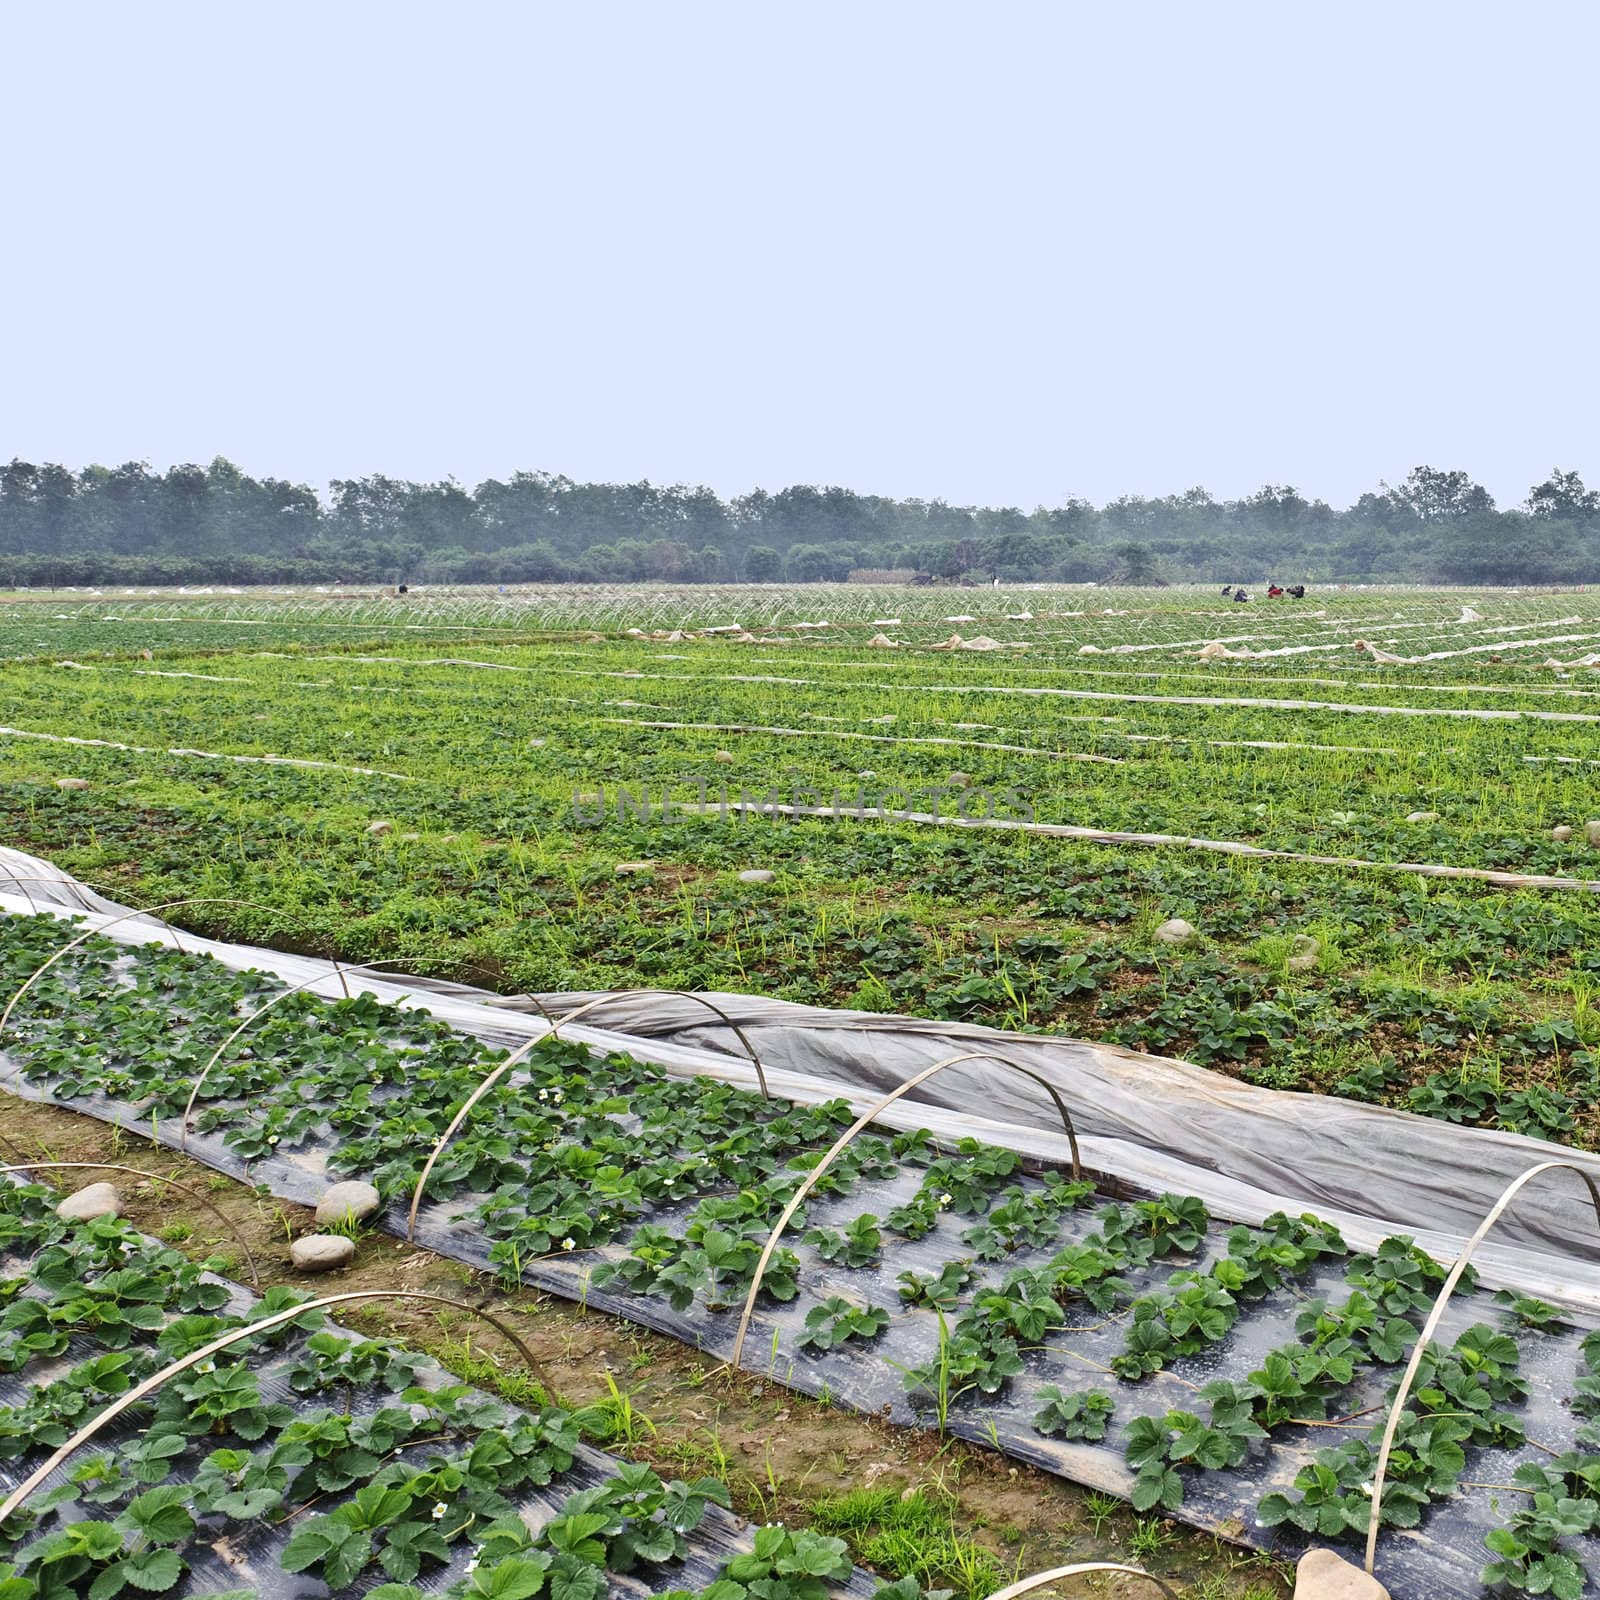 Rows of young strawberry field